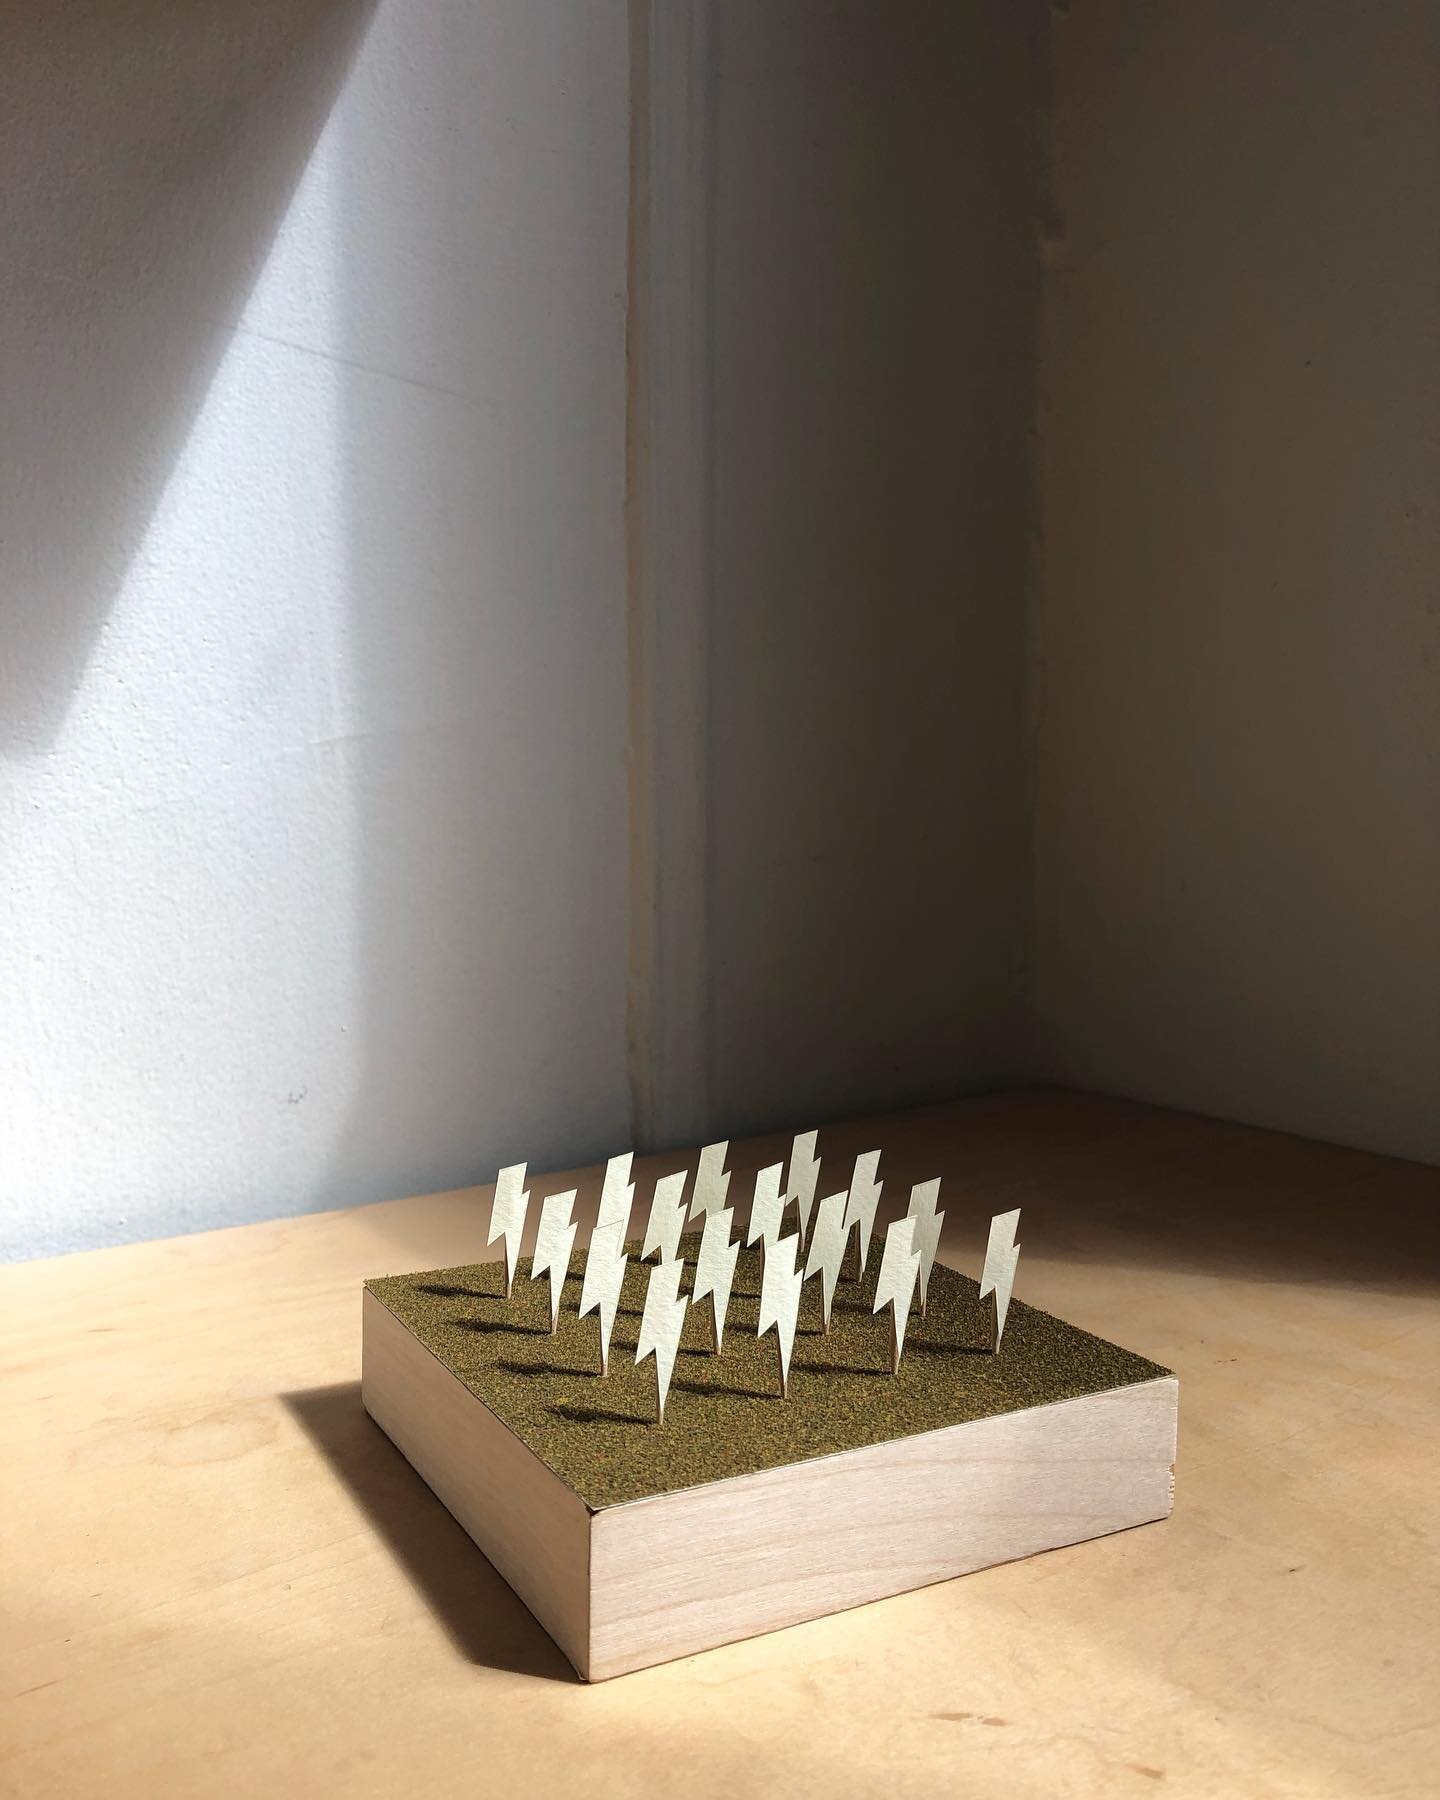 lightning field
plywood, paper, toothpicks, model grass
2.25 x 5 x 5 inches

an ode to #thelightningfield by #walterdemaria